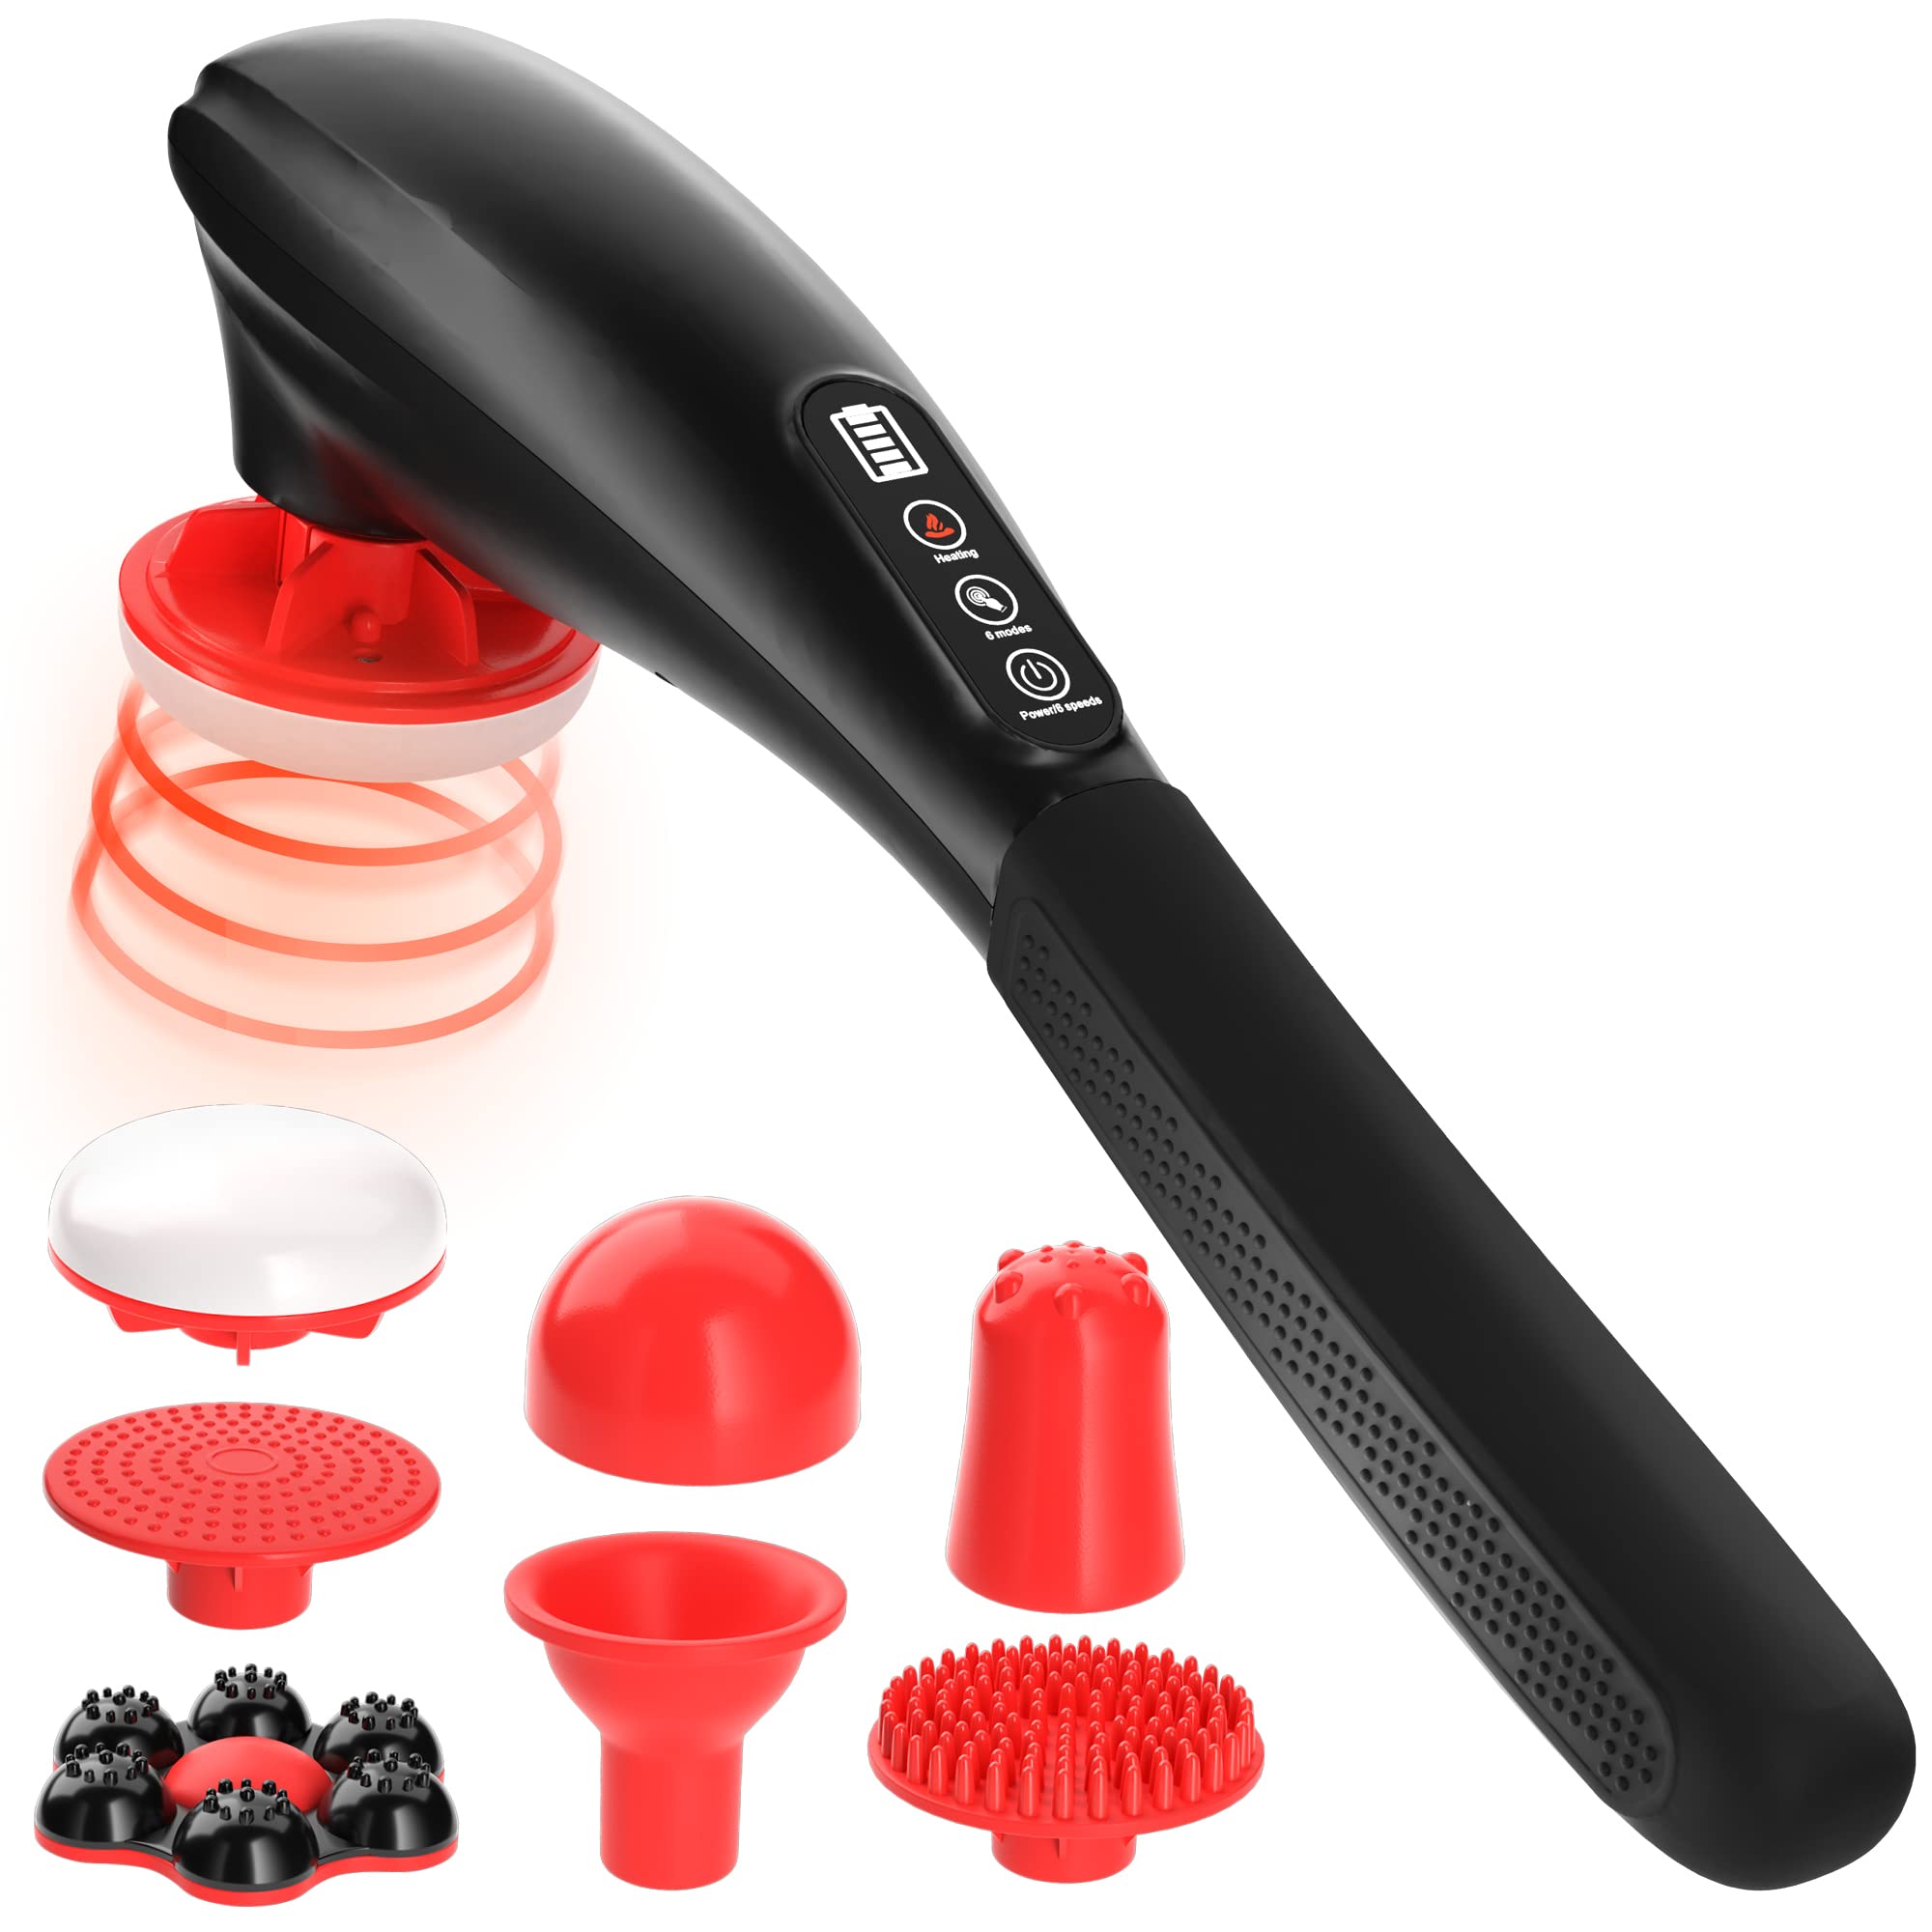 CORDLESS MASSAGER-Back Therapy New version with updated features